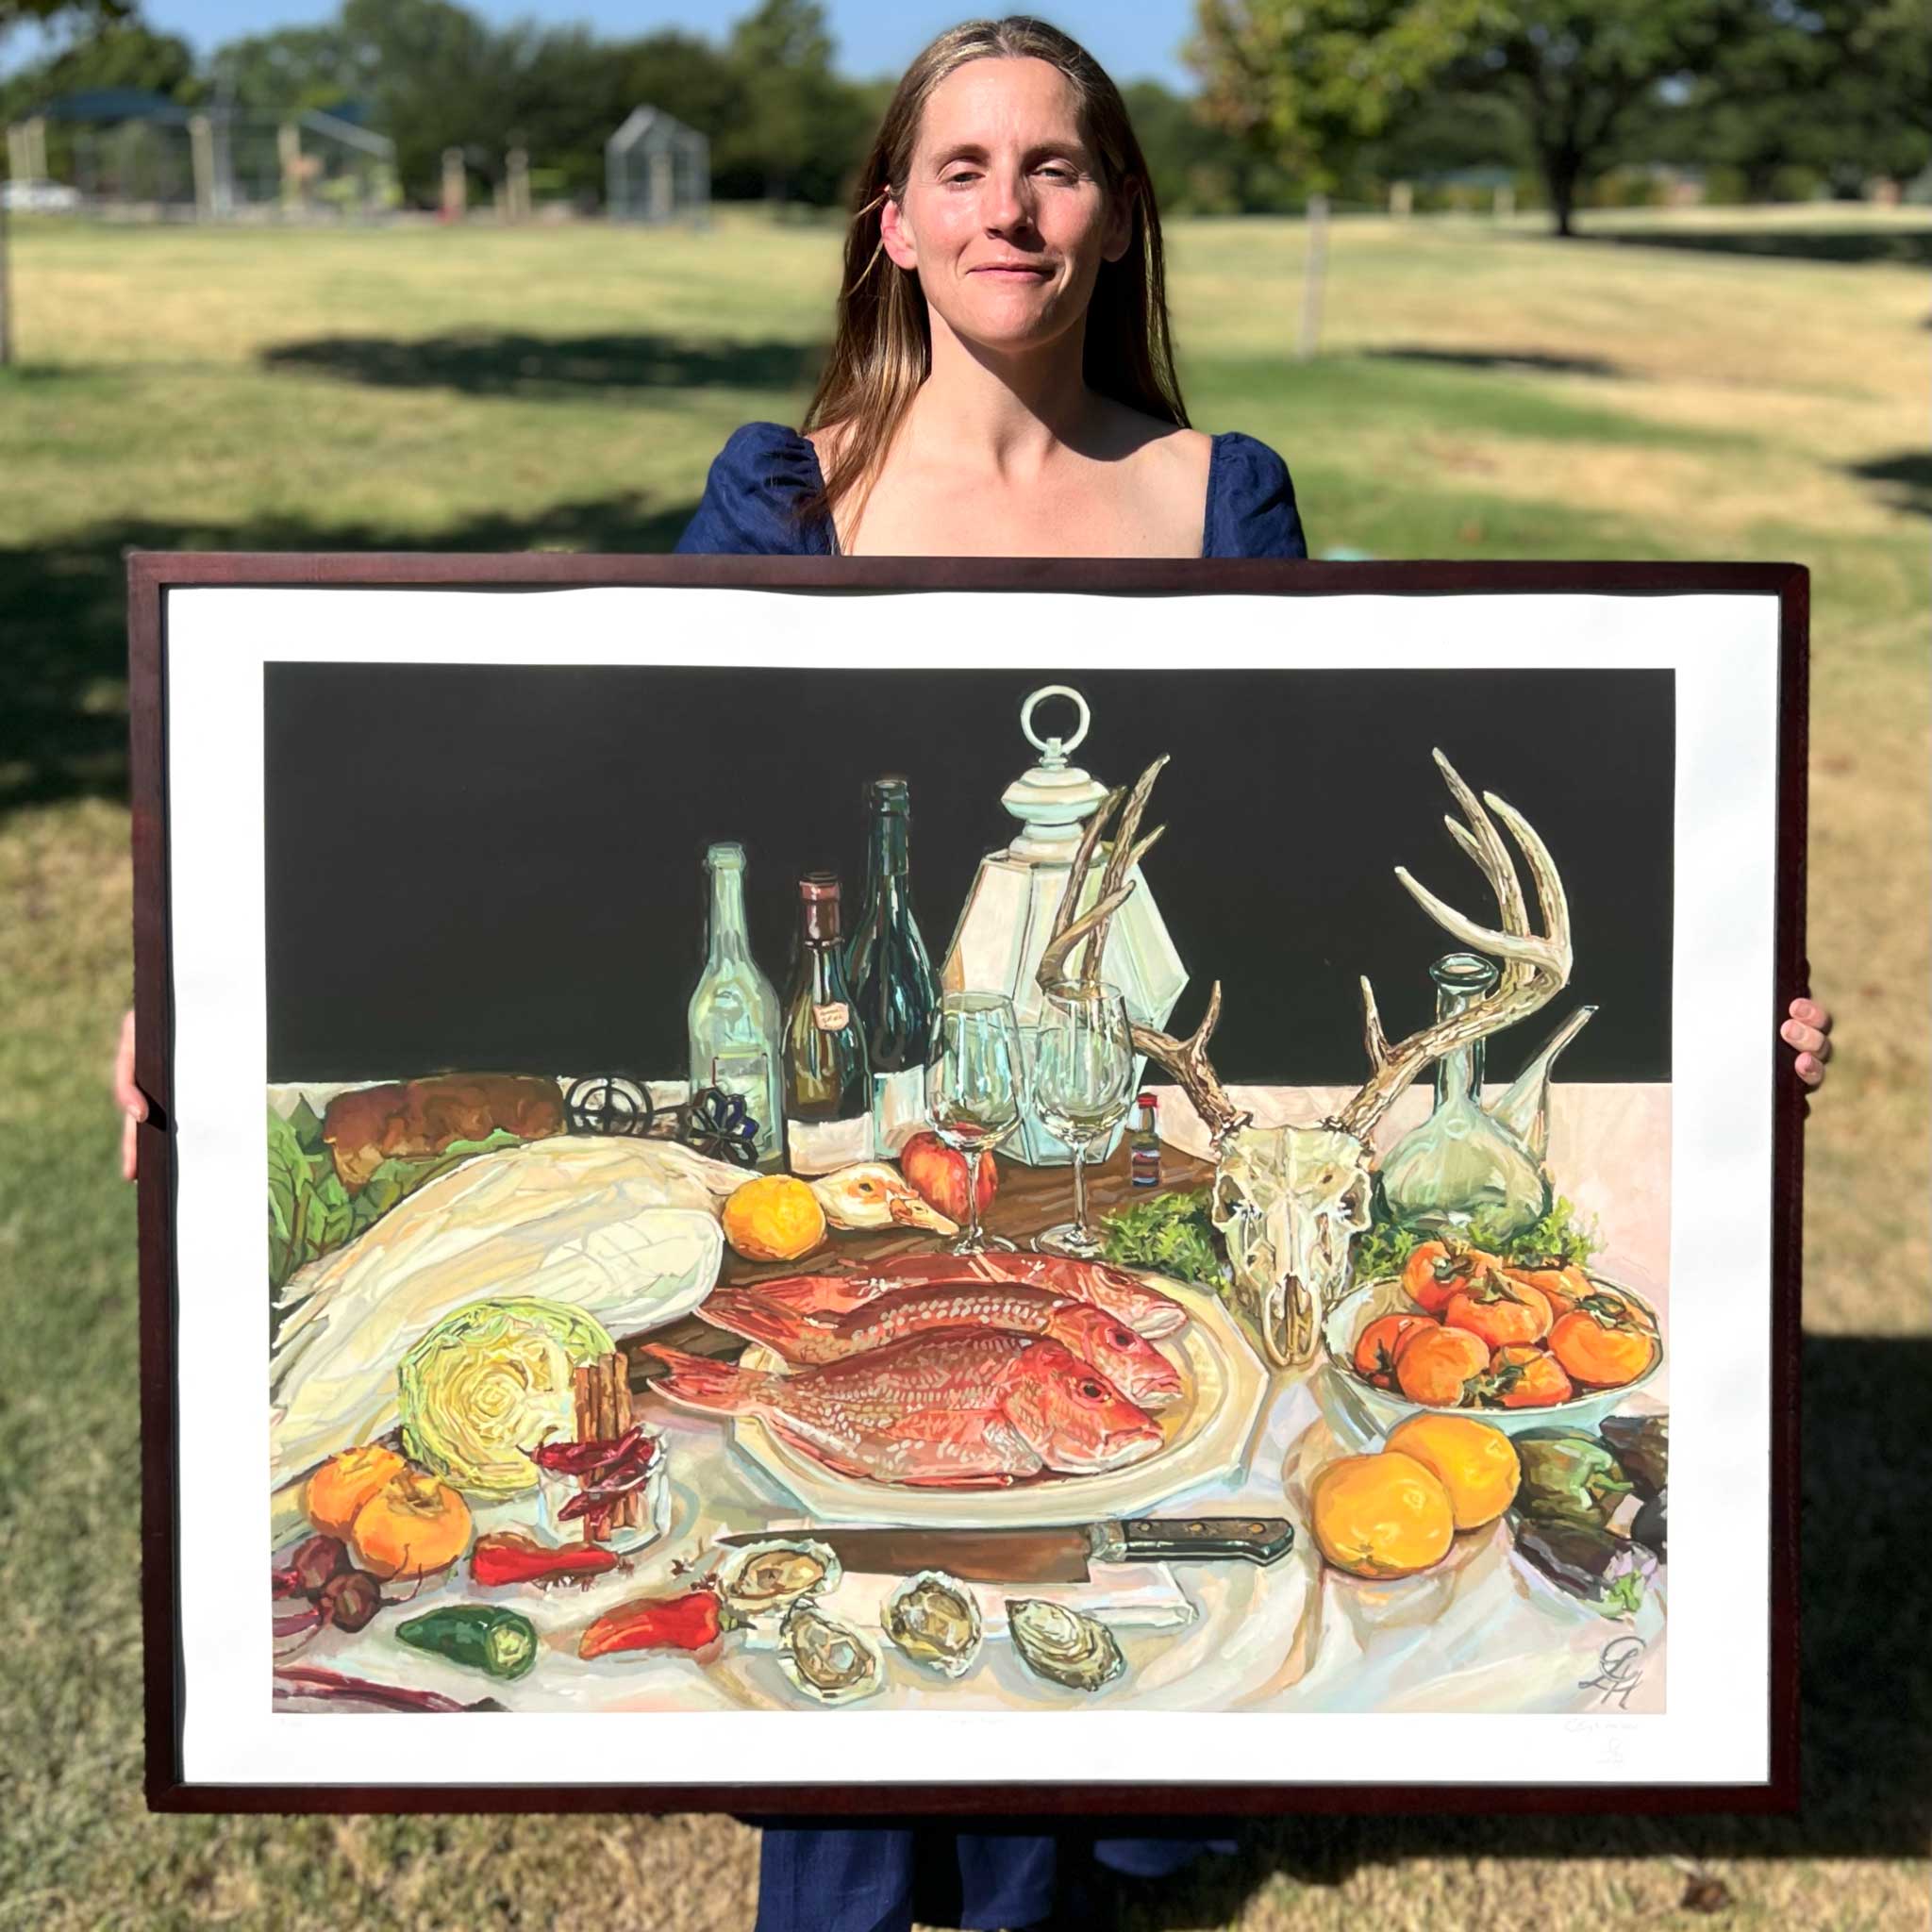 Lenoir x Courtney Holder, Austin Art Print of Foodie Still Life Oil Painting, Limited-Edition Archival Print